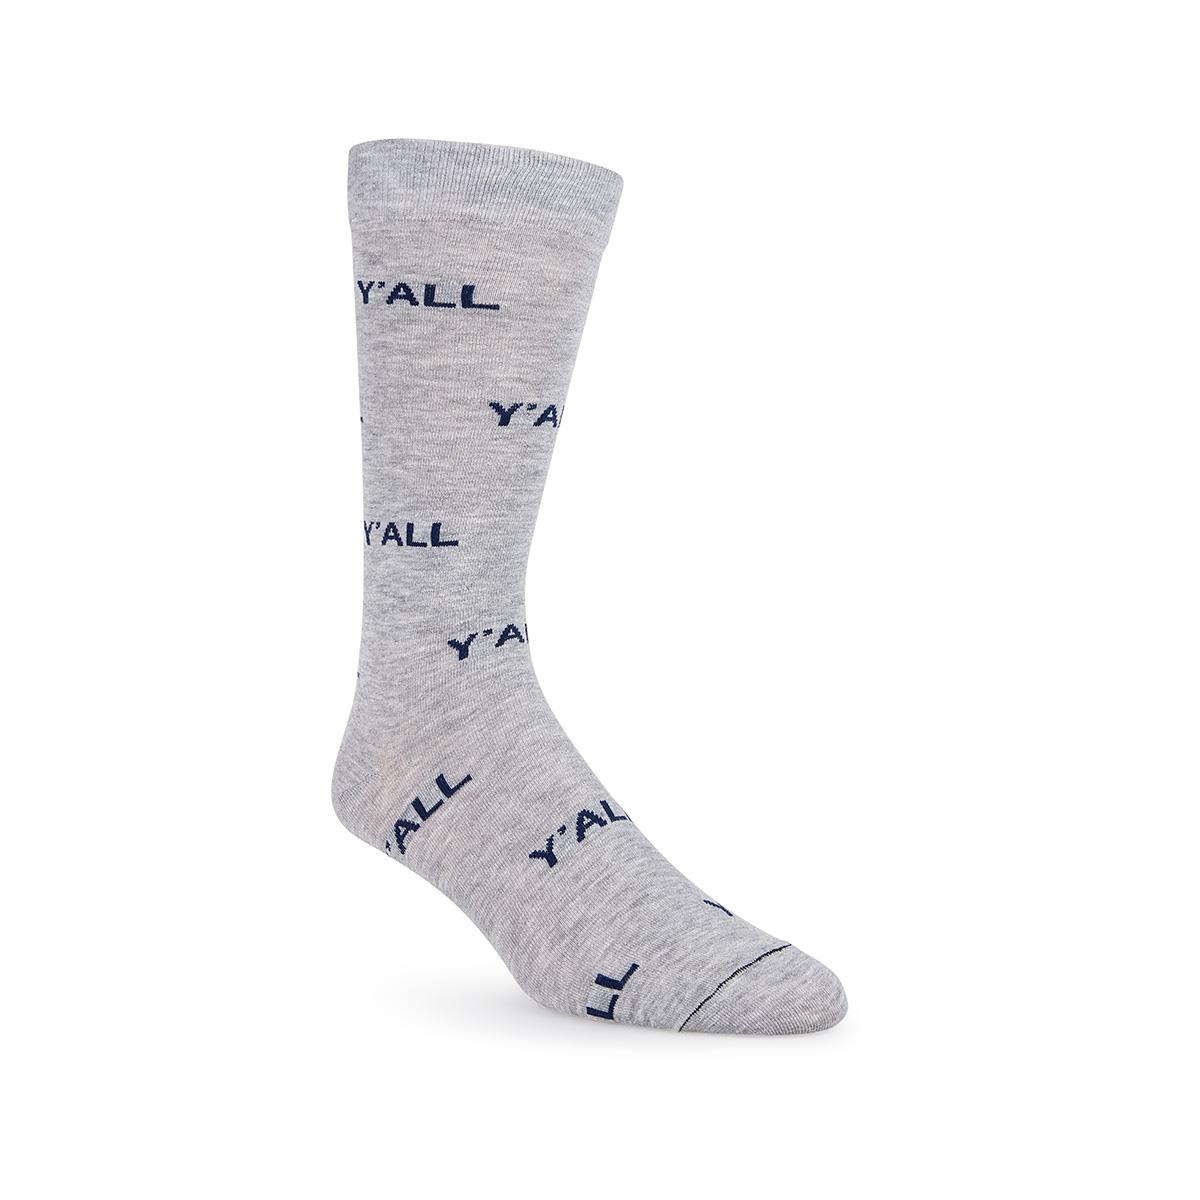  Mast General Store Everyday Lifestyle Crew Socks - Y ` All